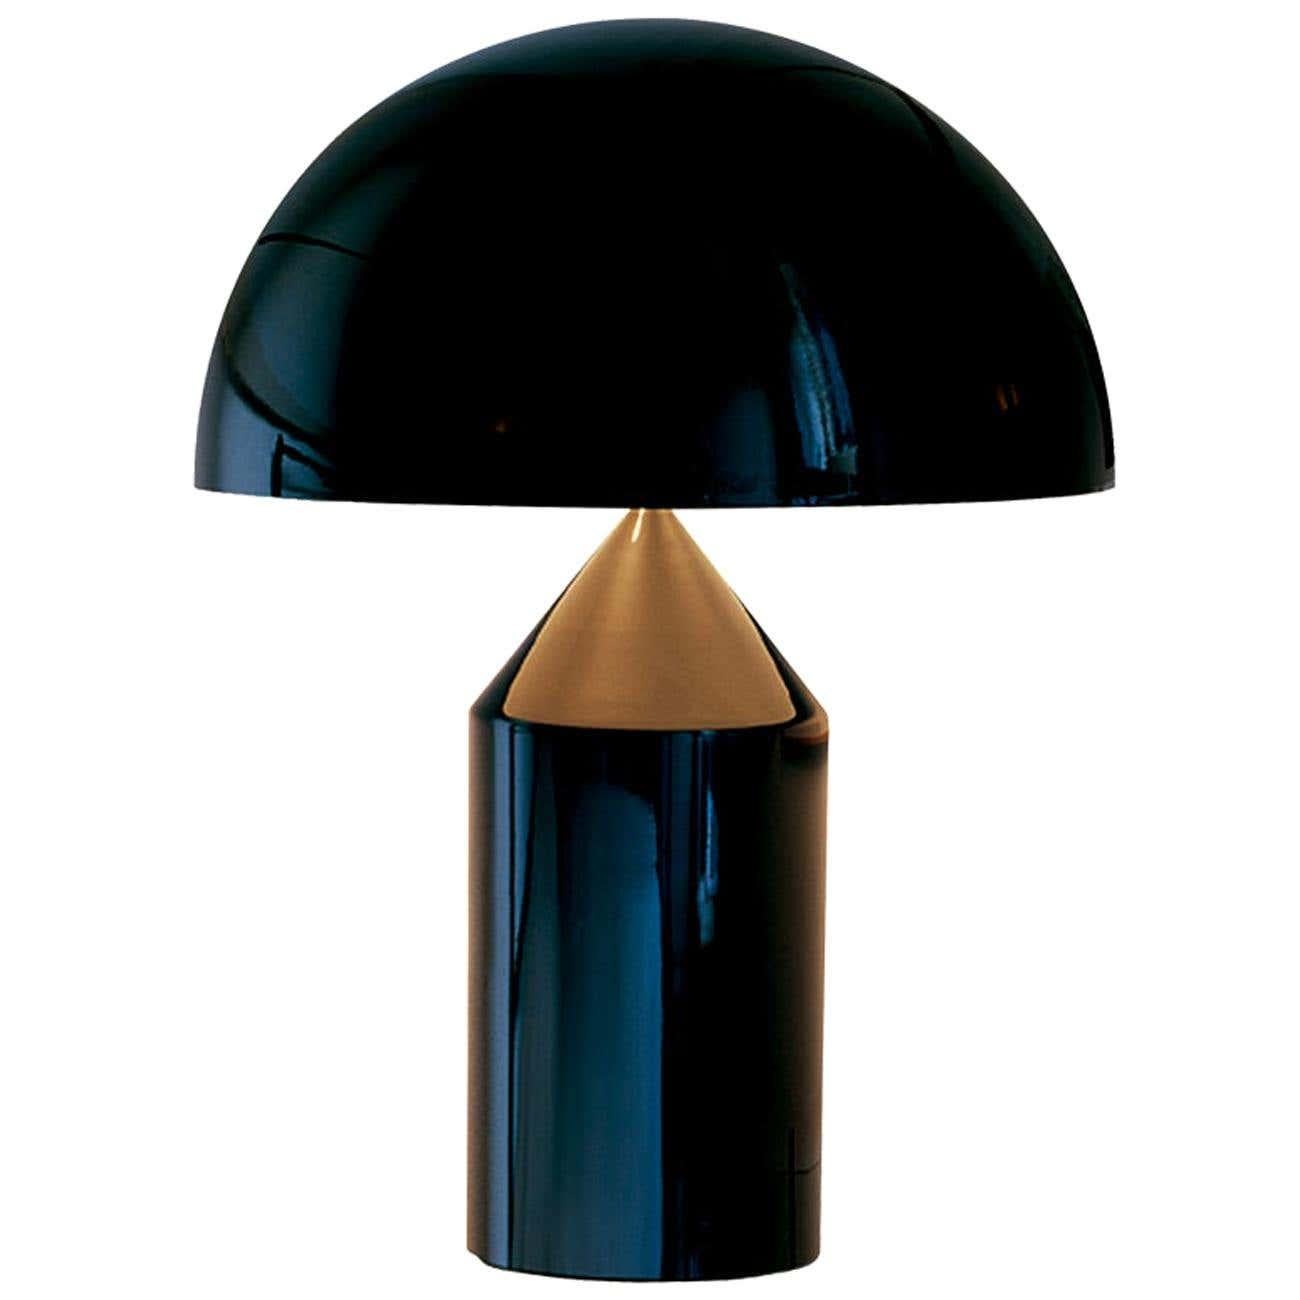 Table lamp designed by Vico Magistretti in 1977
Manufactured by Oluce, Italy.

Designed in 1977 by Vico Magistretti, over the years, Atollo has become the archetype of the table lamp, winning the Compasso d’Oro in 1979 and completely revolutionizing